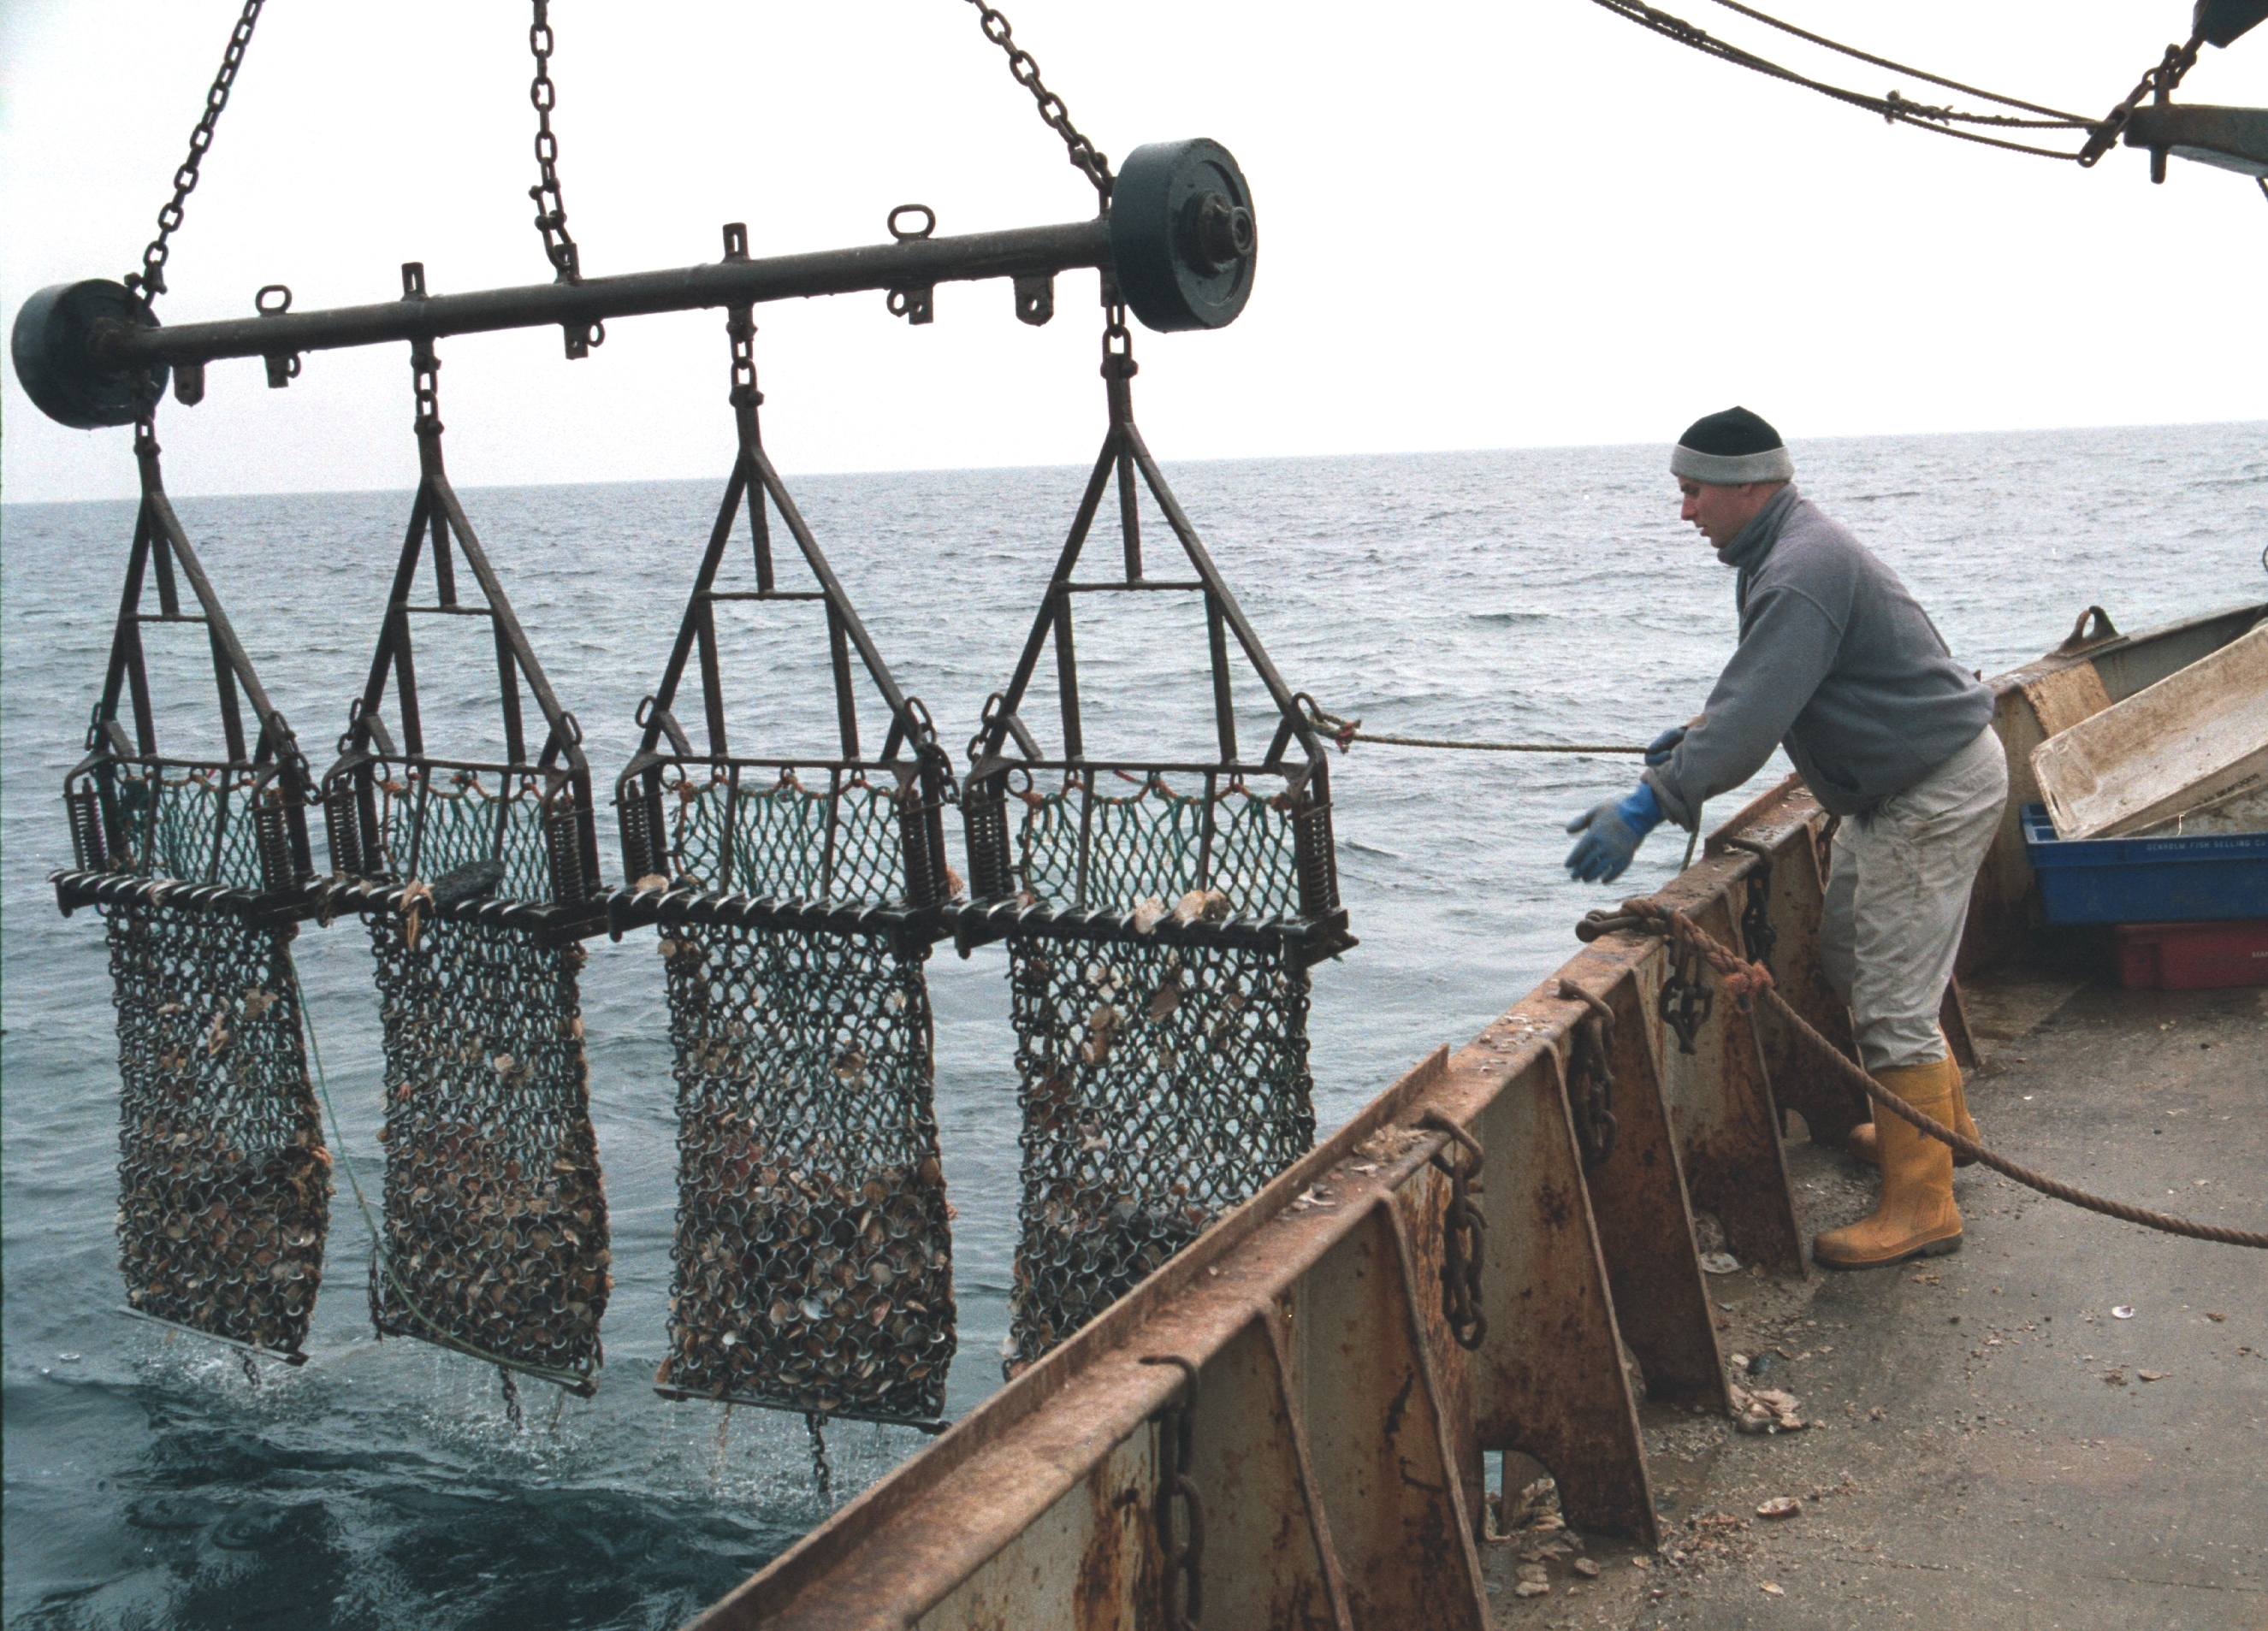 Image: Newhaven dredges used to catch king scallops in the UK (credit: Bryce Stewart)